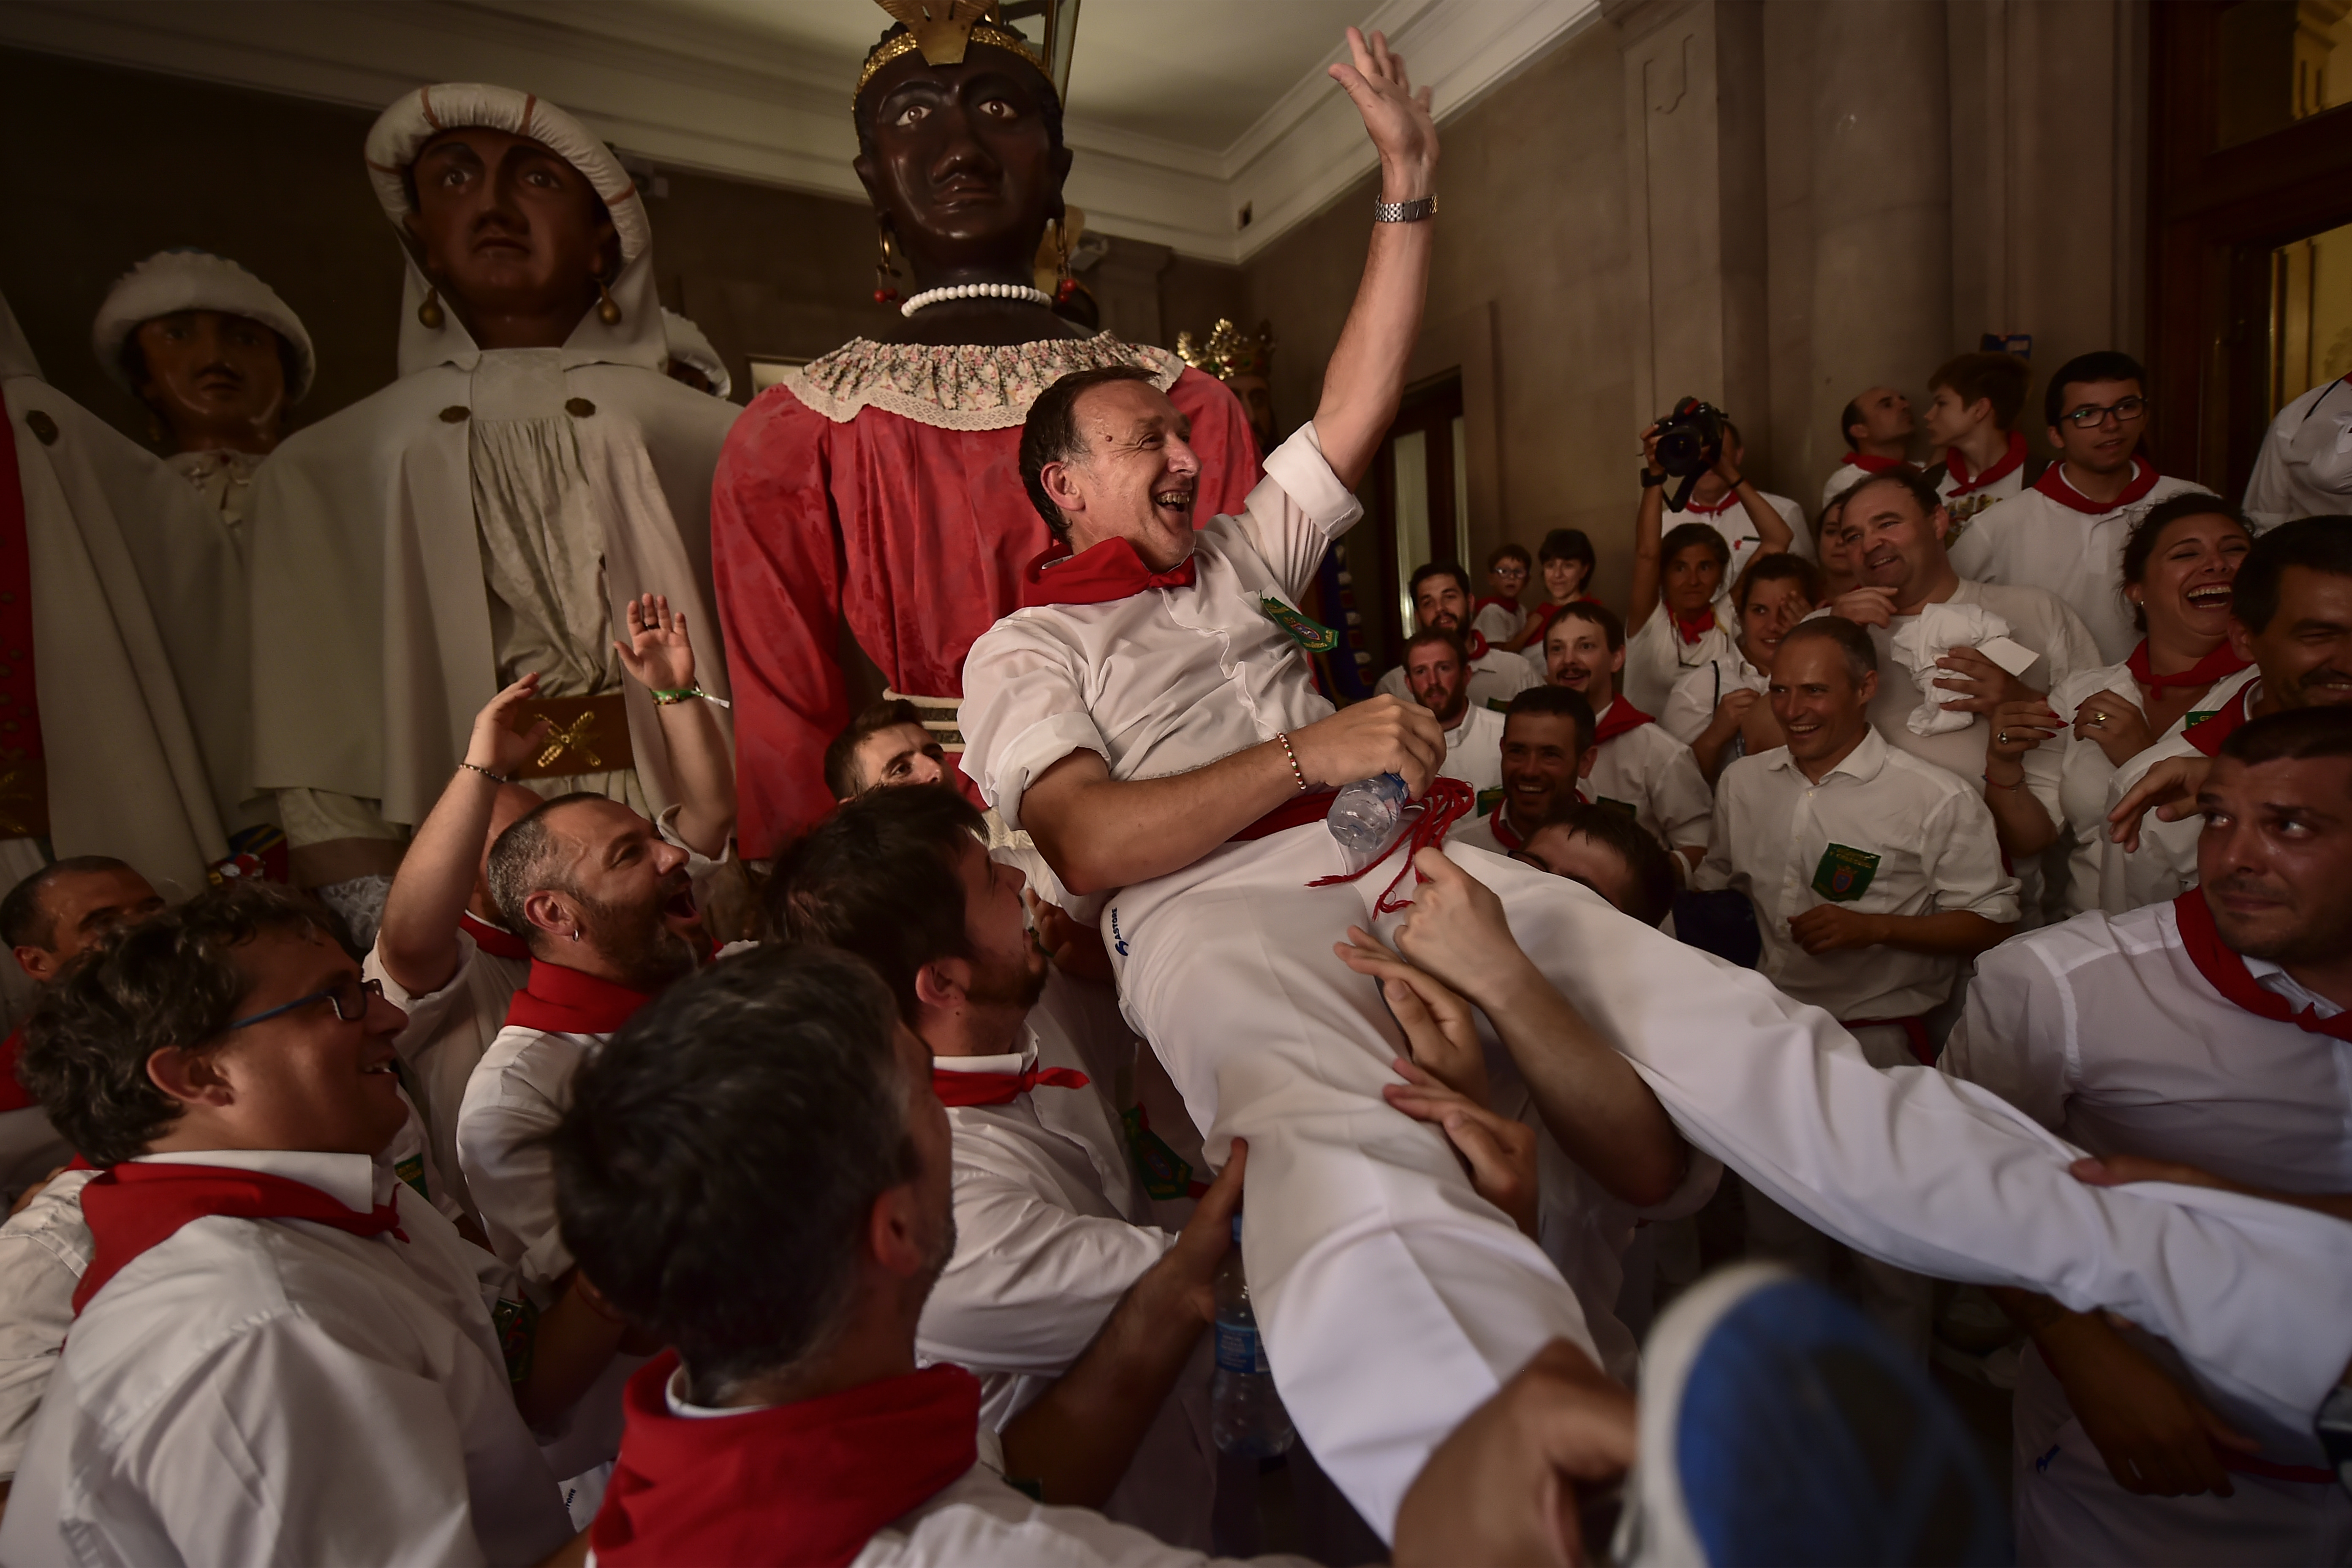 Members of San Fermin Comparsa Parade say goodbye to giants of San Fermin's Comparsa at the San Fermin Festival in Pamplona, northern Spain, Sunday July 14, 2018. Revellers from around the world flock to Pamplona every year to take part in the eight days of the running of the bulls. (AP Photo/Alvaro Barrientos)